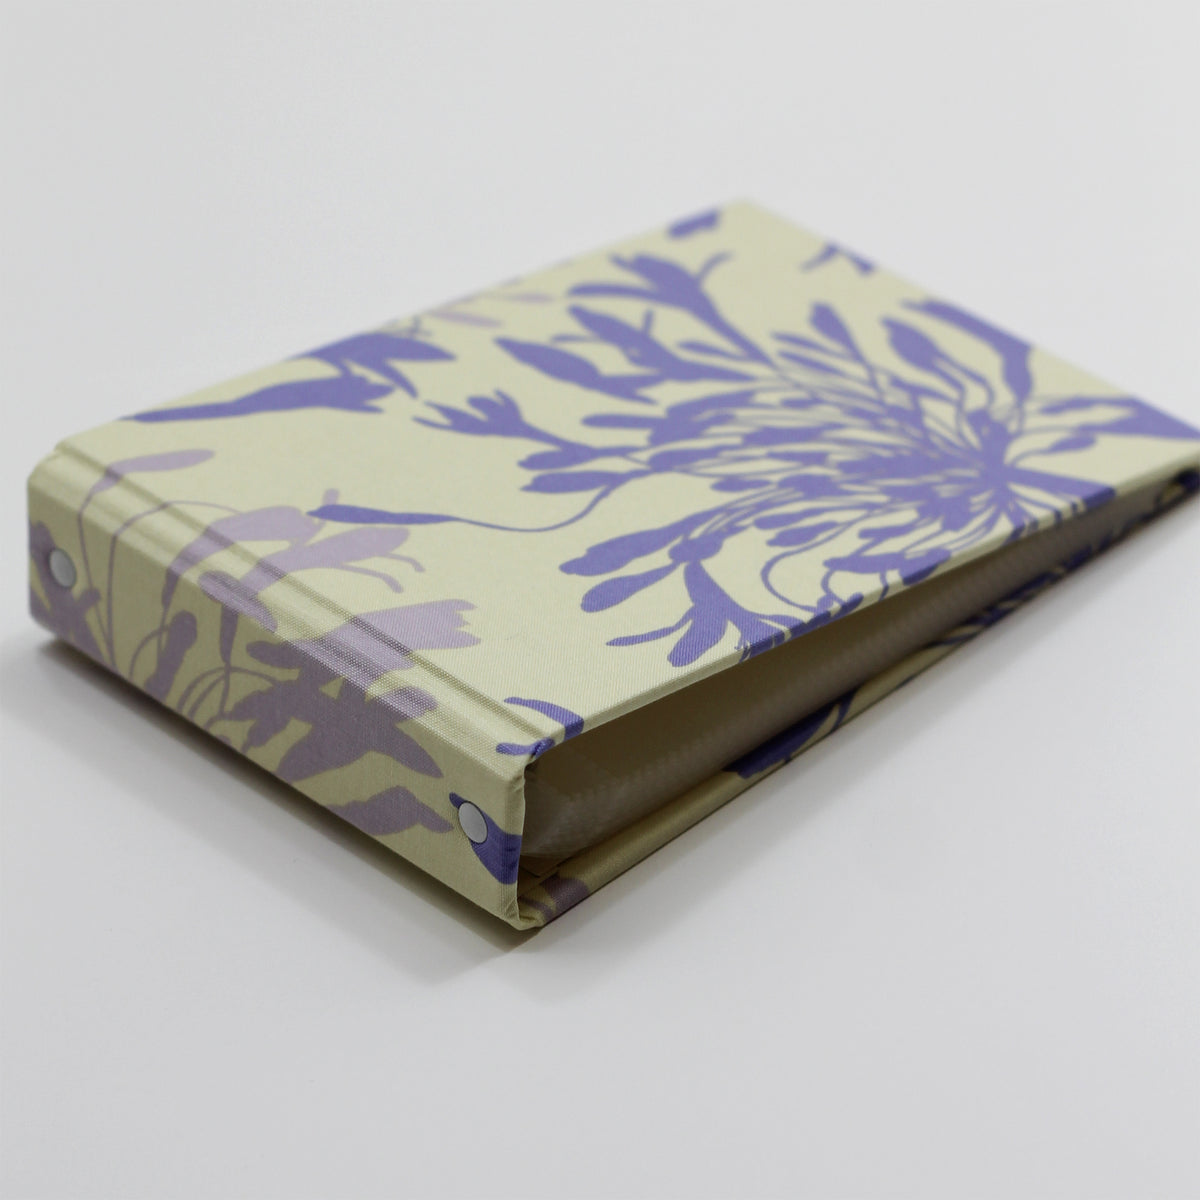 Small Photo Binder | for 4x6 Photos | with Lilac Bloom Fabric Cover